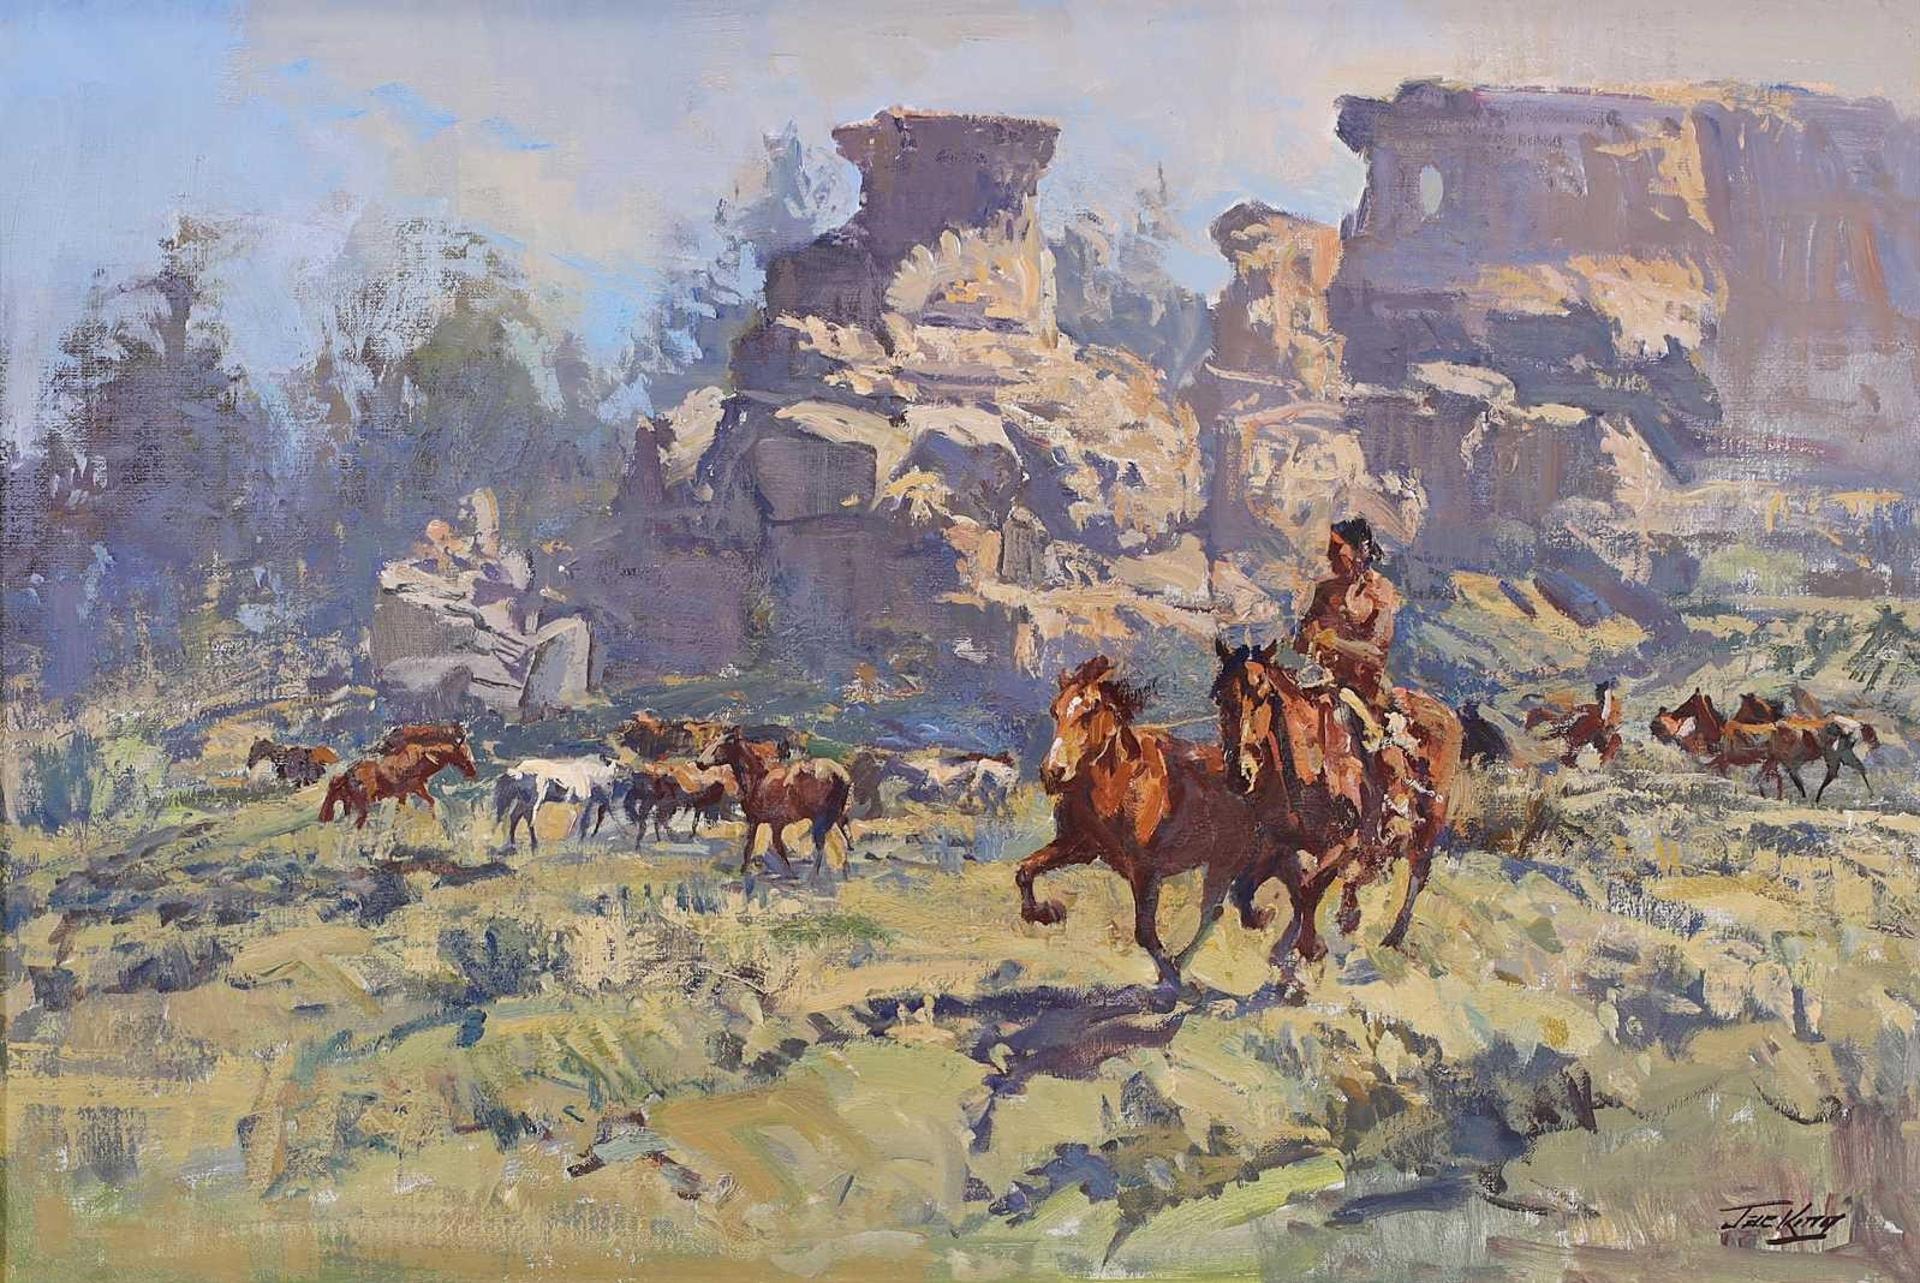 Jack [Jac] Elmo King (1920-1998) - Native American Rider With Horses In A Desert Canyon